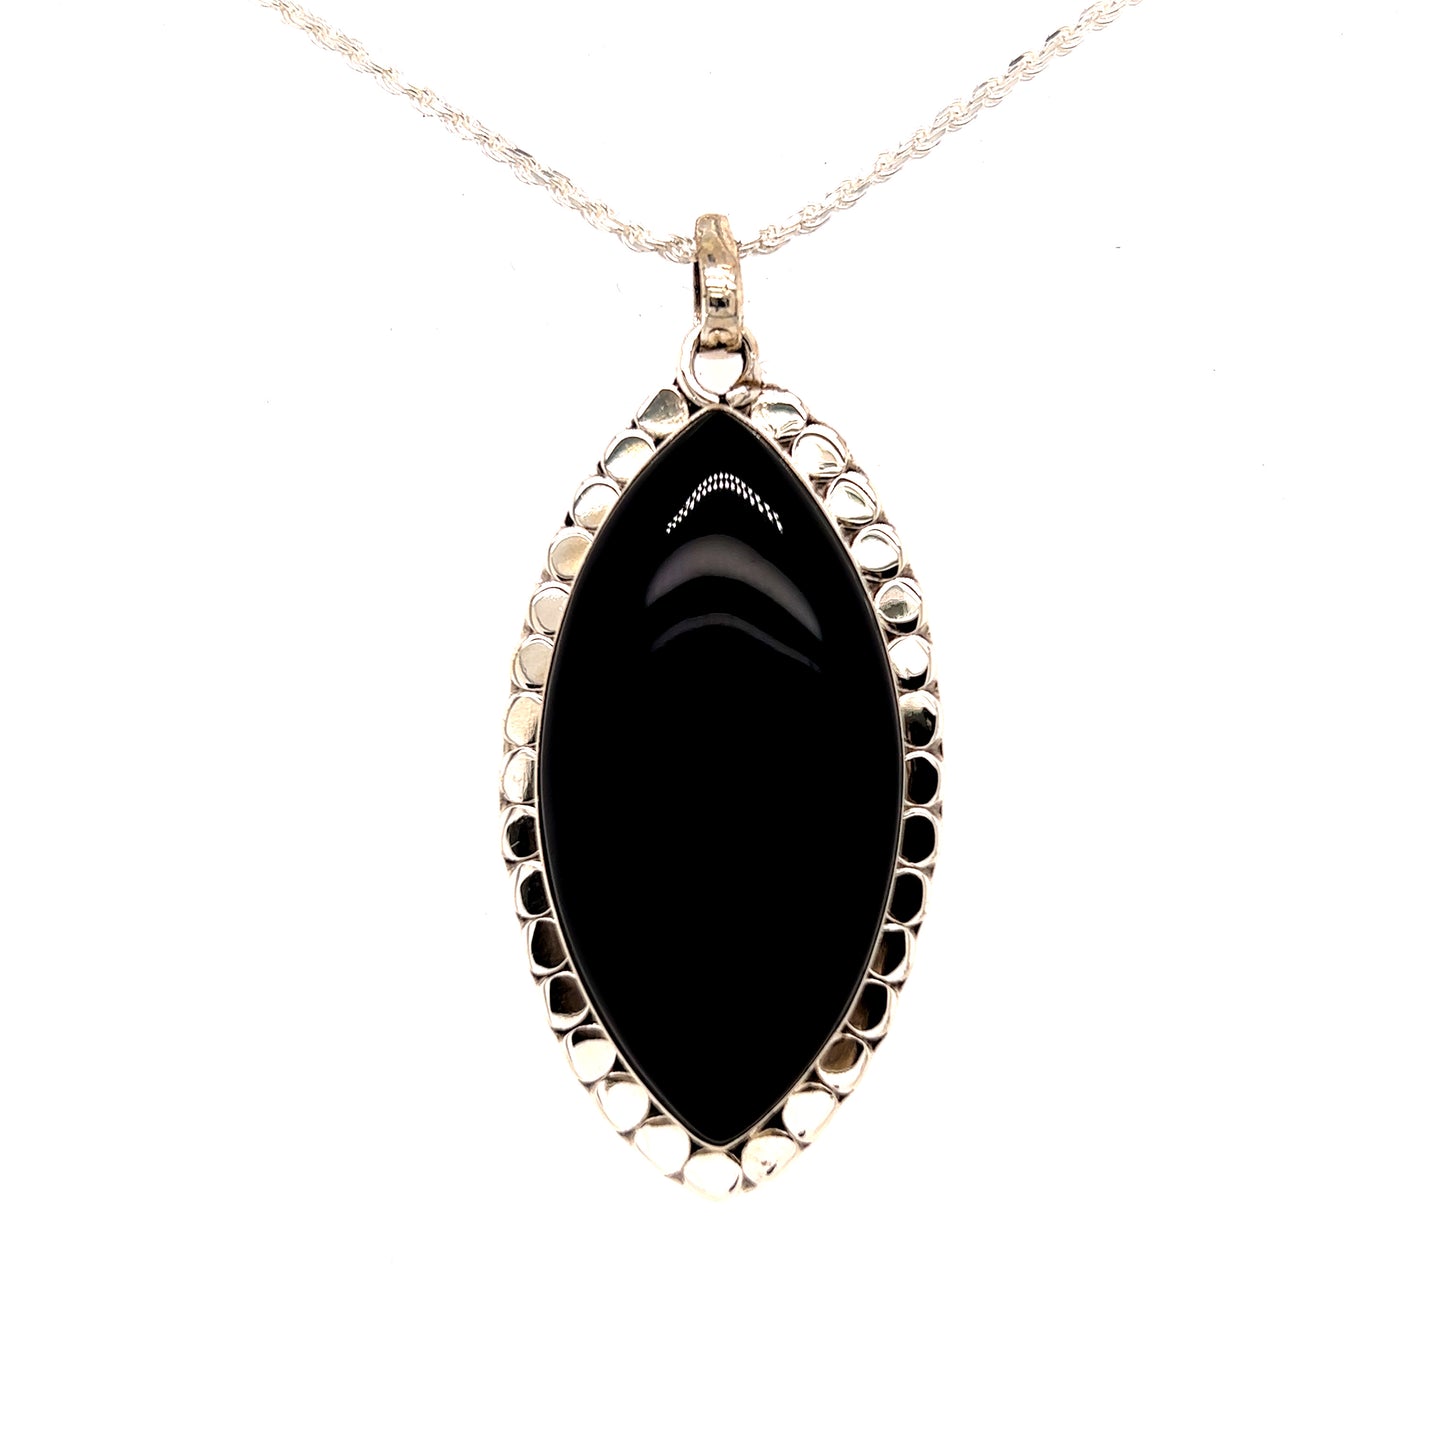 A powerful Statement Onyx Pendant with a Textured Setting on a gold chain from Super Silver.